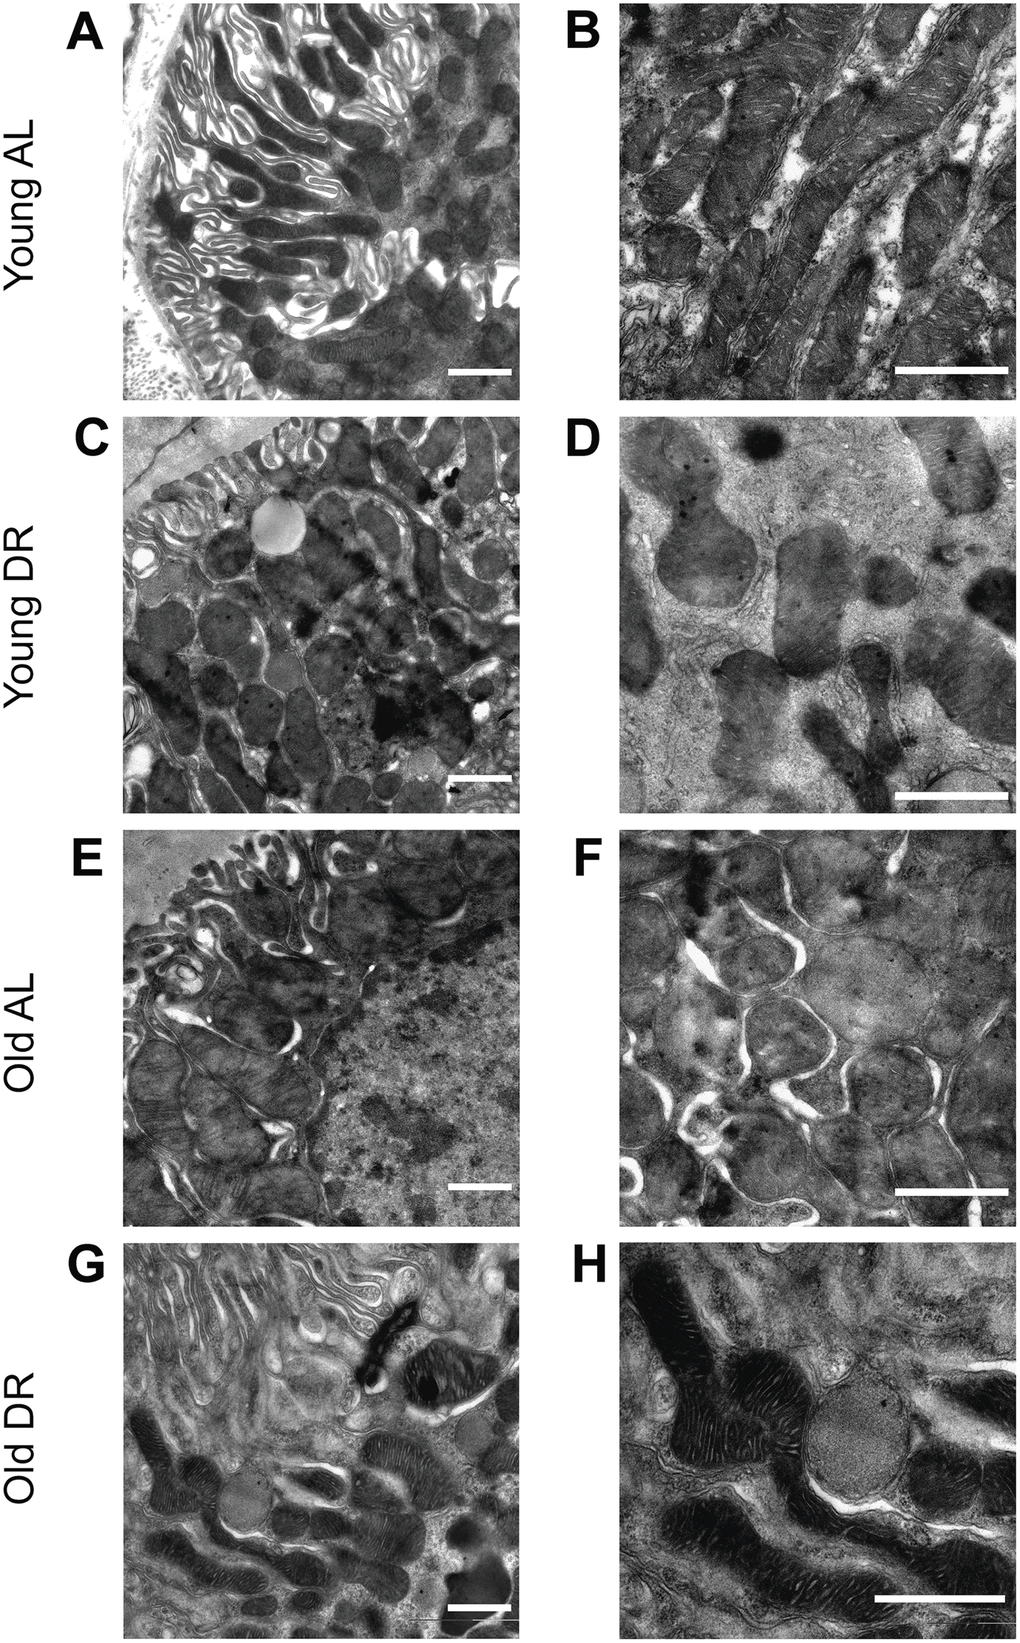 Ultrastructure of mitochondria of renal tubular cells in the intact kidney of young (A, B) and old (E, F) rats and those after DR (C, D and G, H, correspondingly). Renal tubular cells in young rats contain mitochondria in the orthodox configuration, while mitochondria in the old kidney demonstrate slight swelling of intercristae space and matrix. Tubular epithelium of kidney after DR exposure demonstrates noticeable condensation of the mitochondrial matrix in both young (C, D) and old (G, H) rats. Scale bar, 1 μm. For young AL rats n=5, for young DR rats n=6, for old AL rats n=6, for old DR rats n=5. AL, ad libitum, DR, dietary restriction.